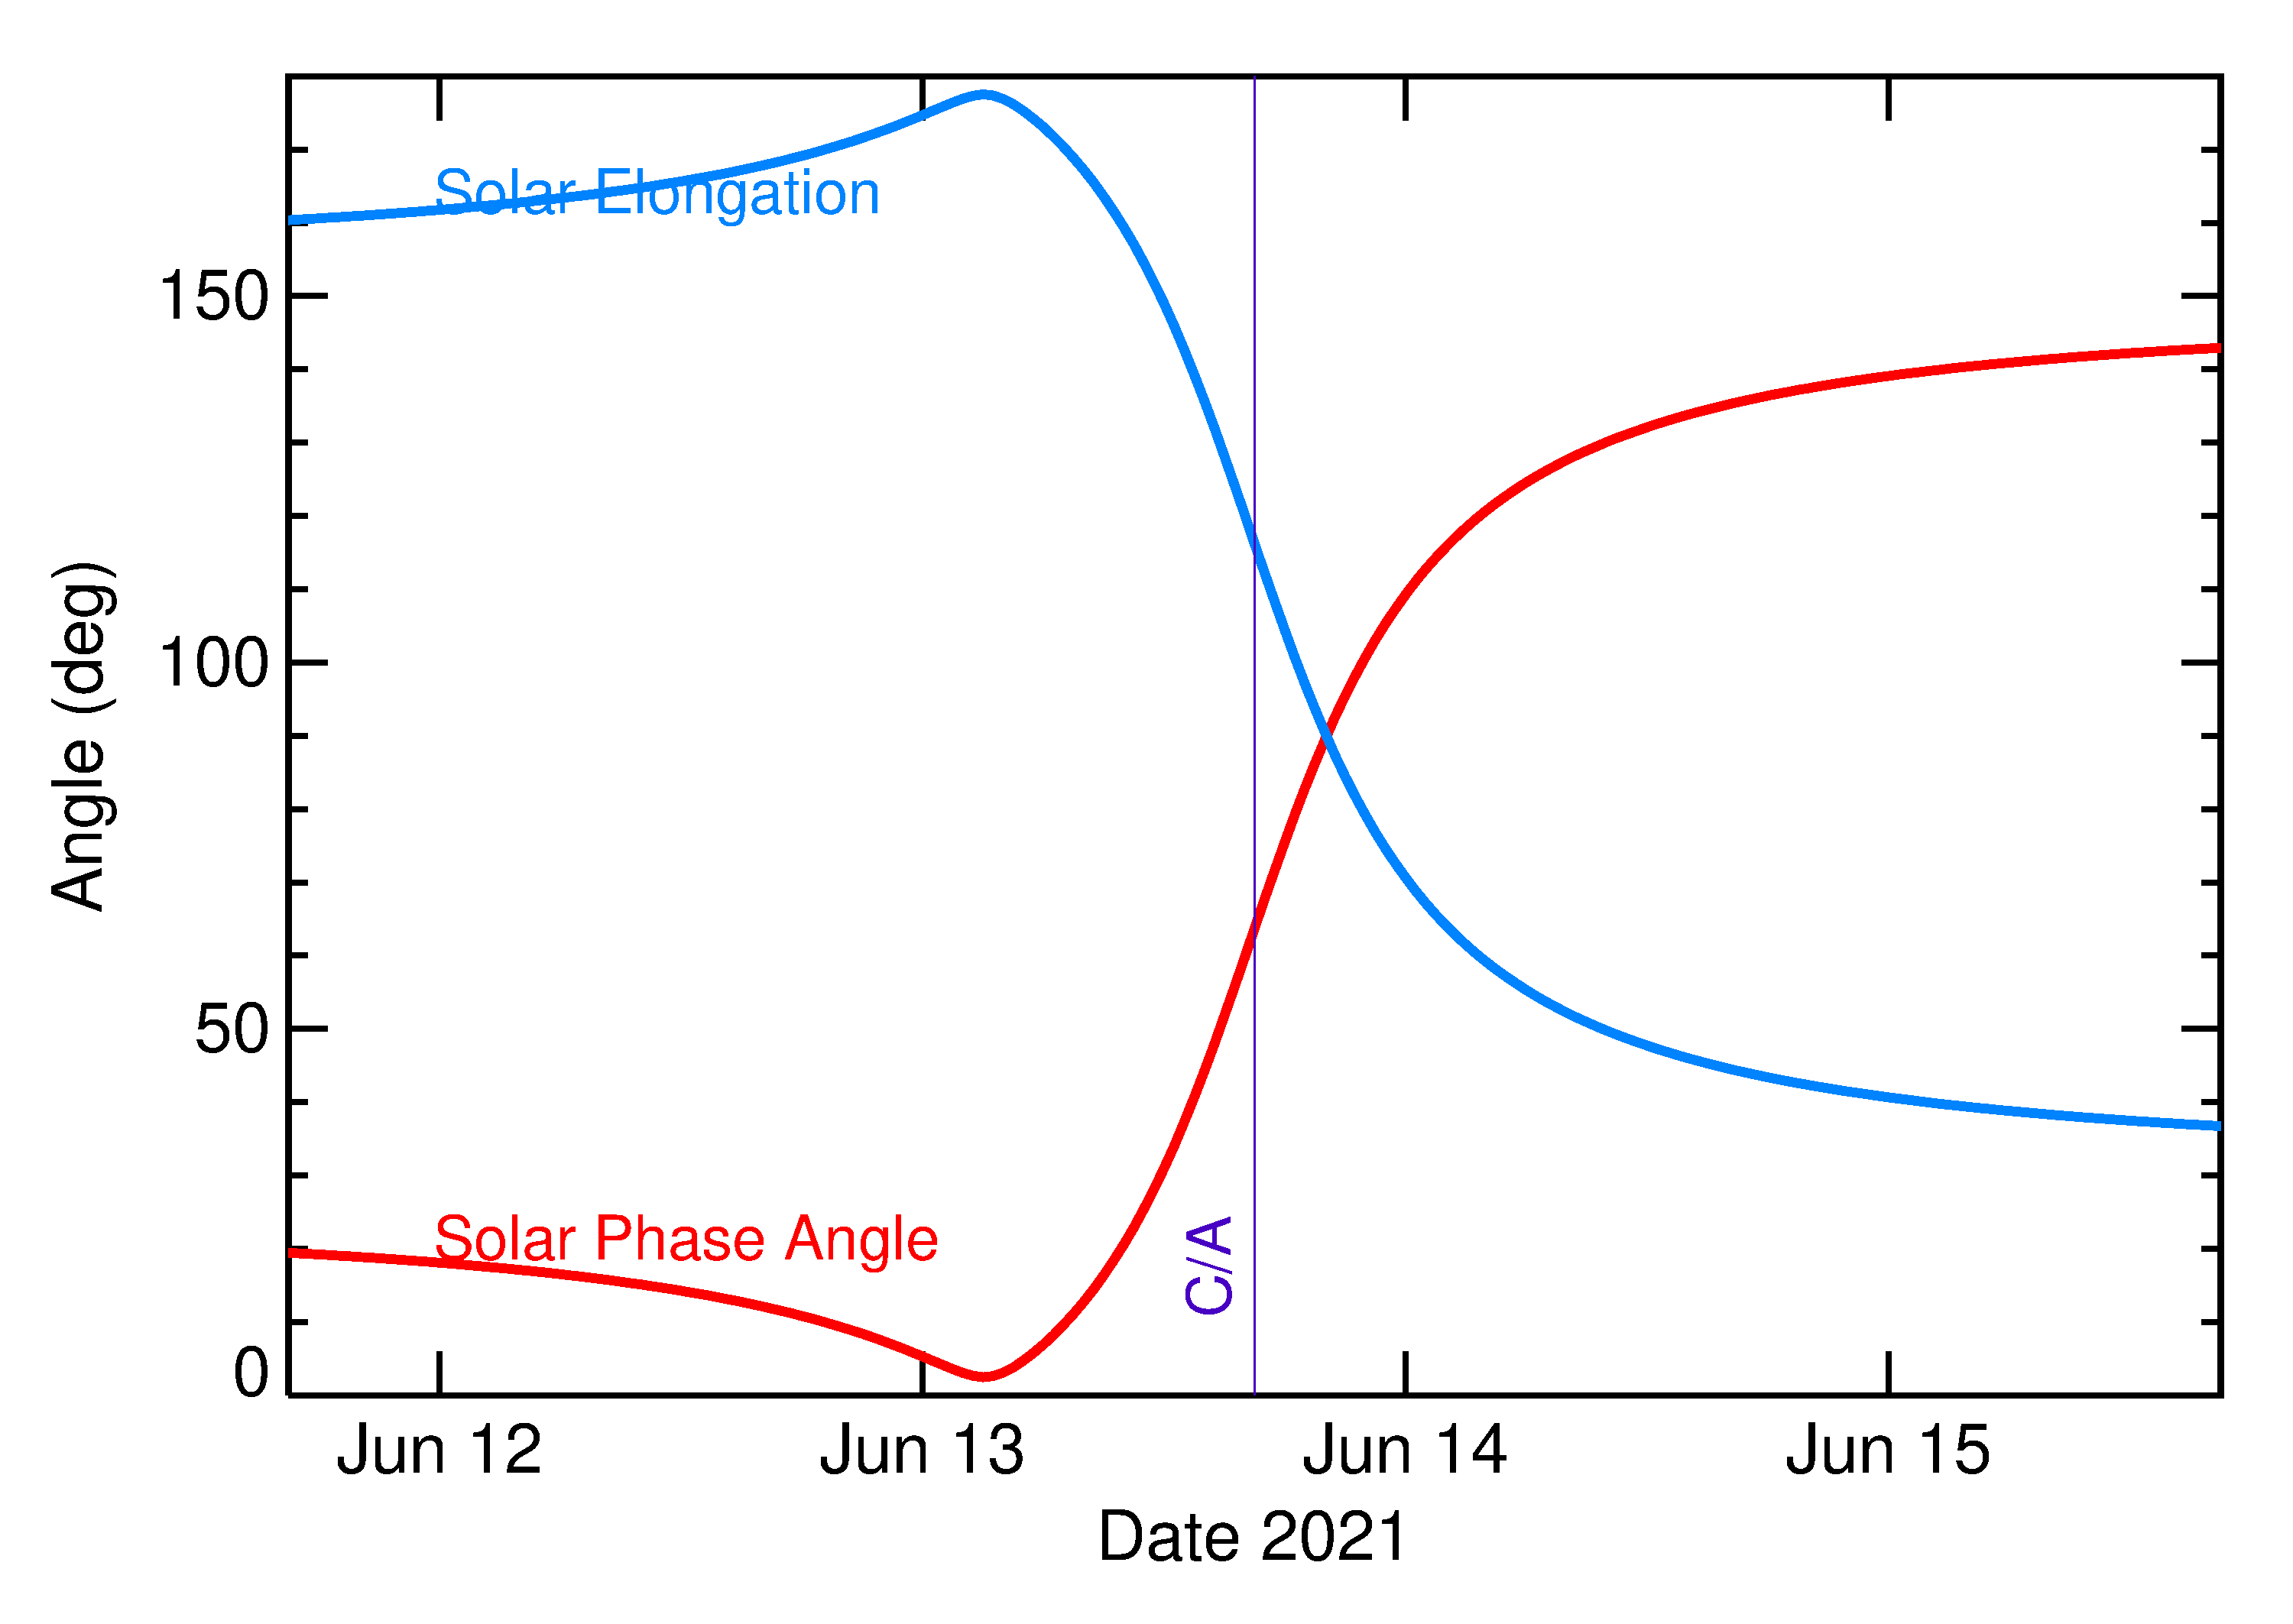 Solar Elongation and Solar Phase Angle of 2021 LO2 in the days around closest approach